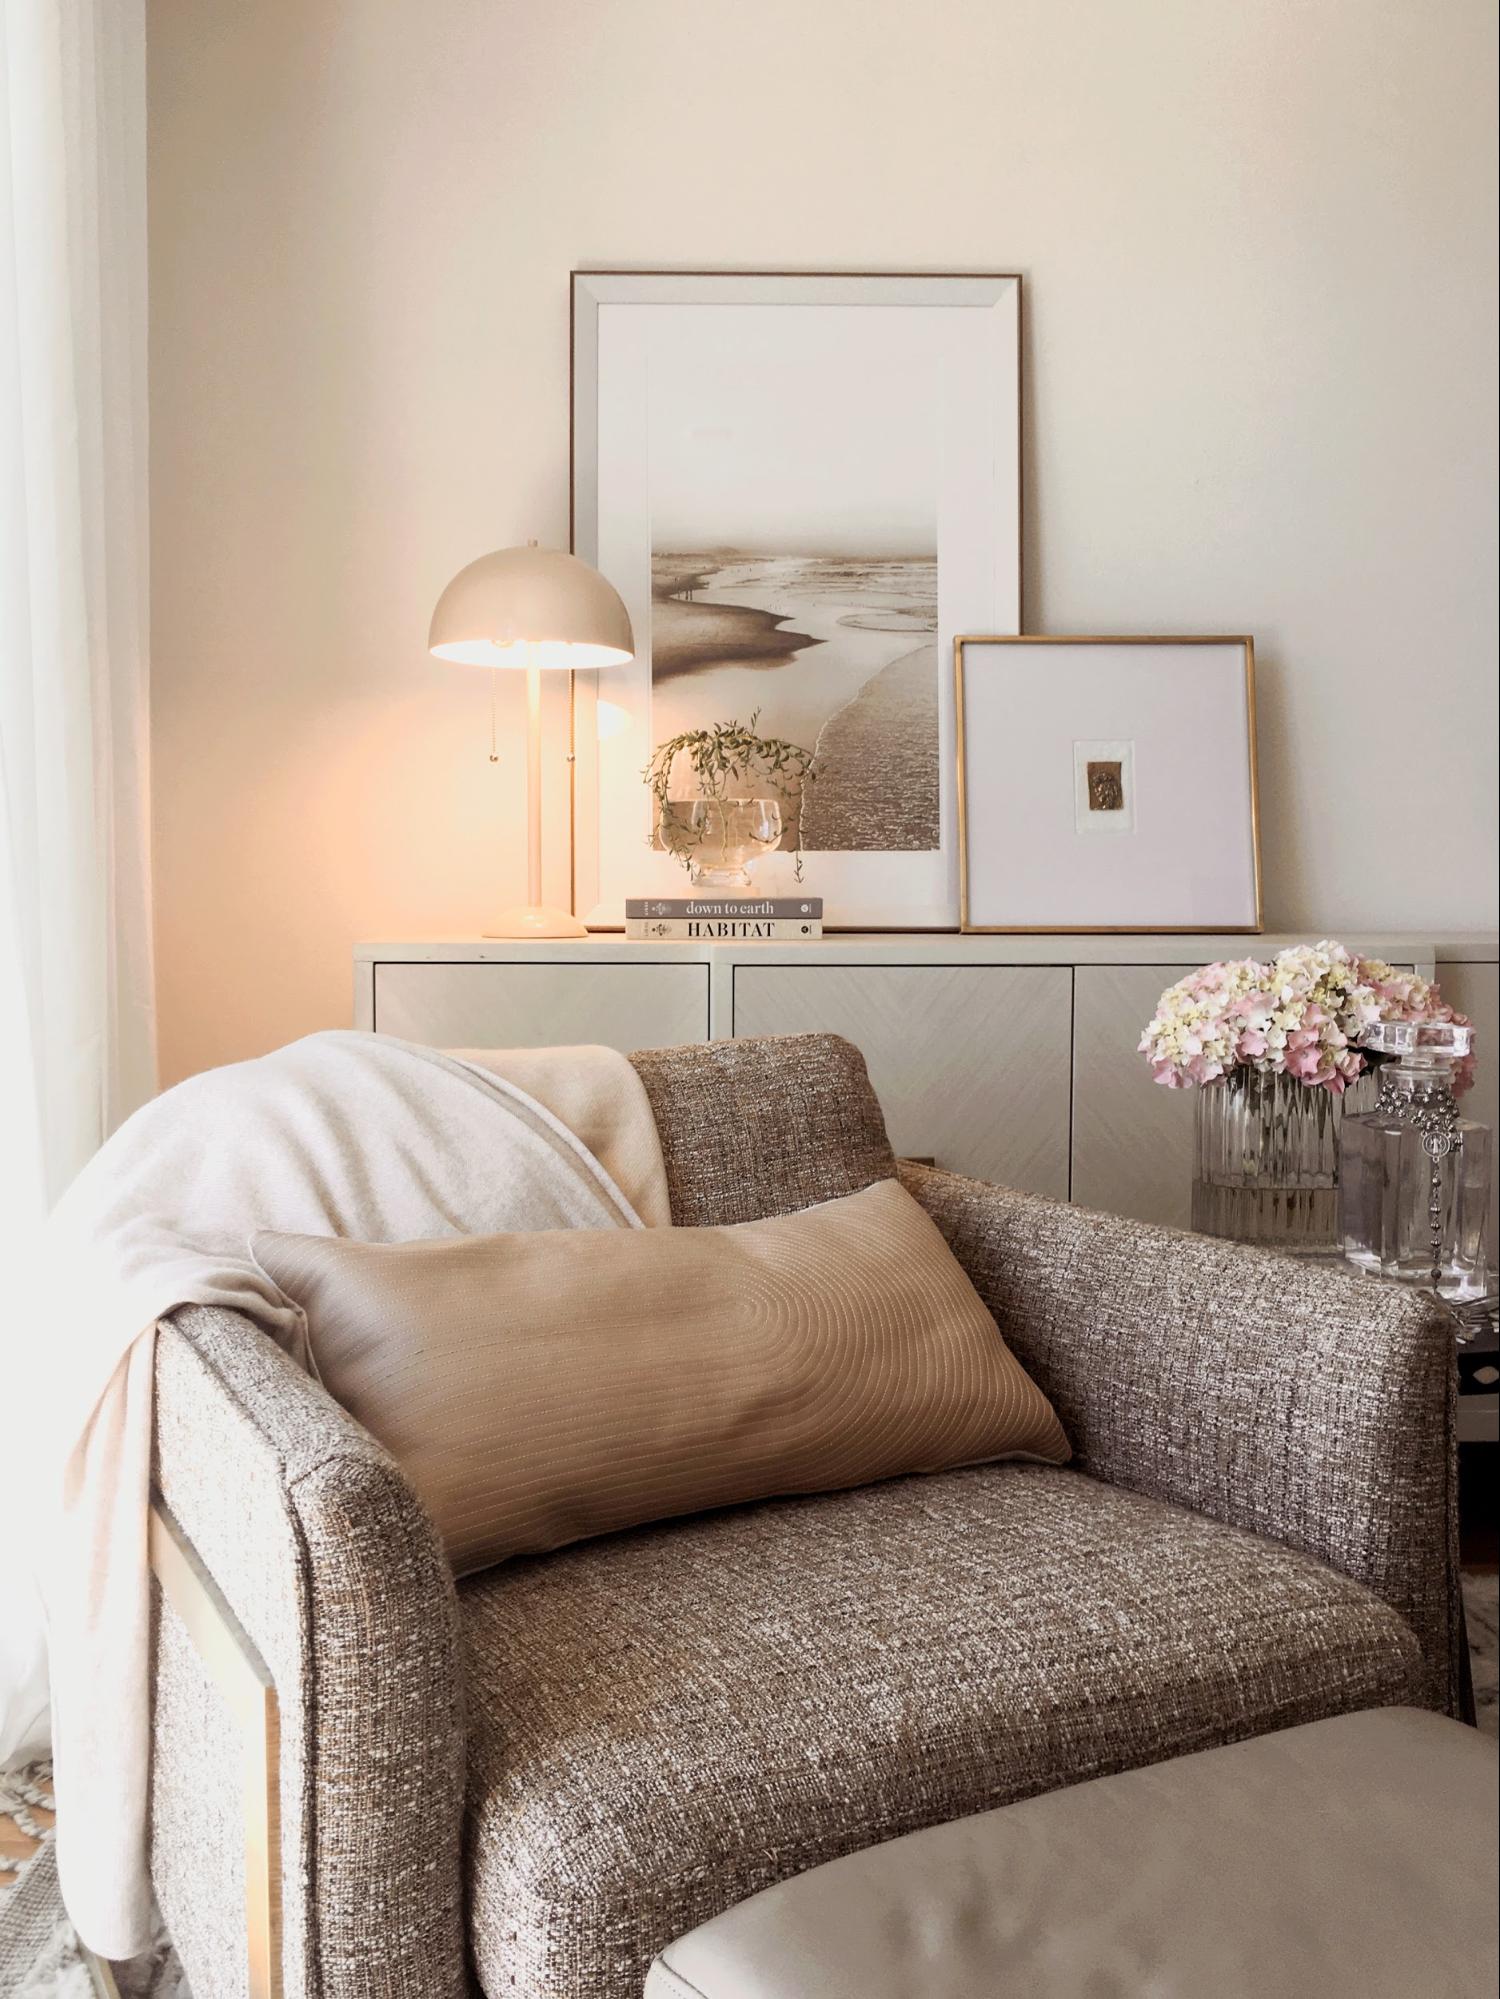 Setting the trend for your Fall home decor